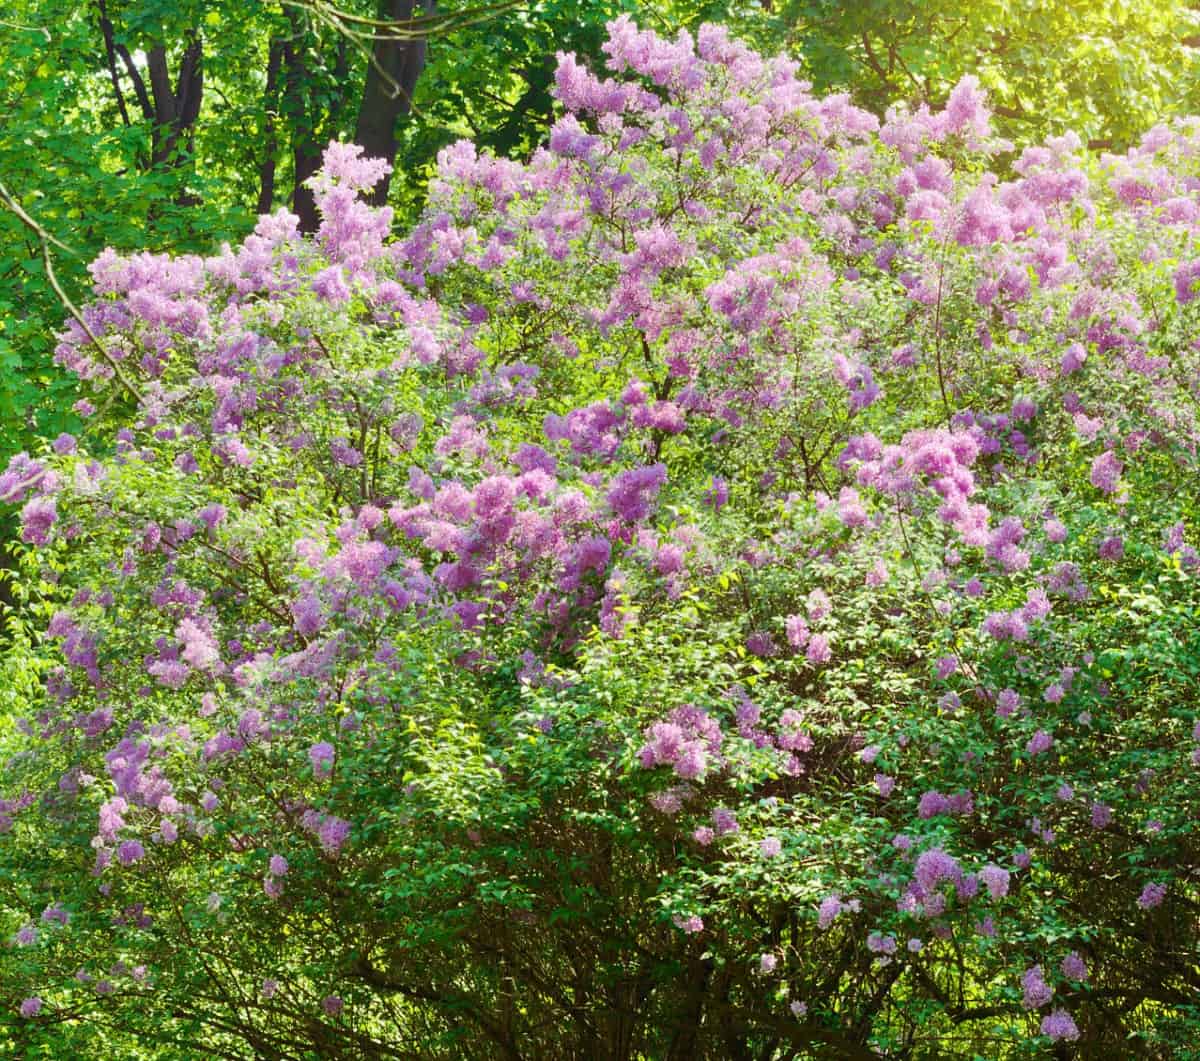 Lilacs add a delightful fragrance to any yard.